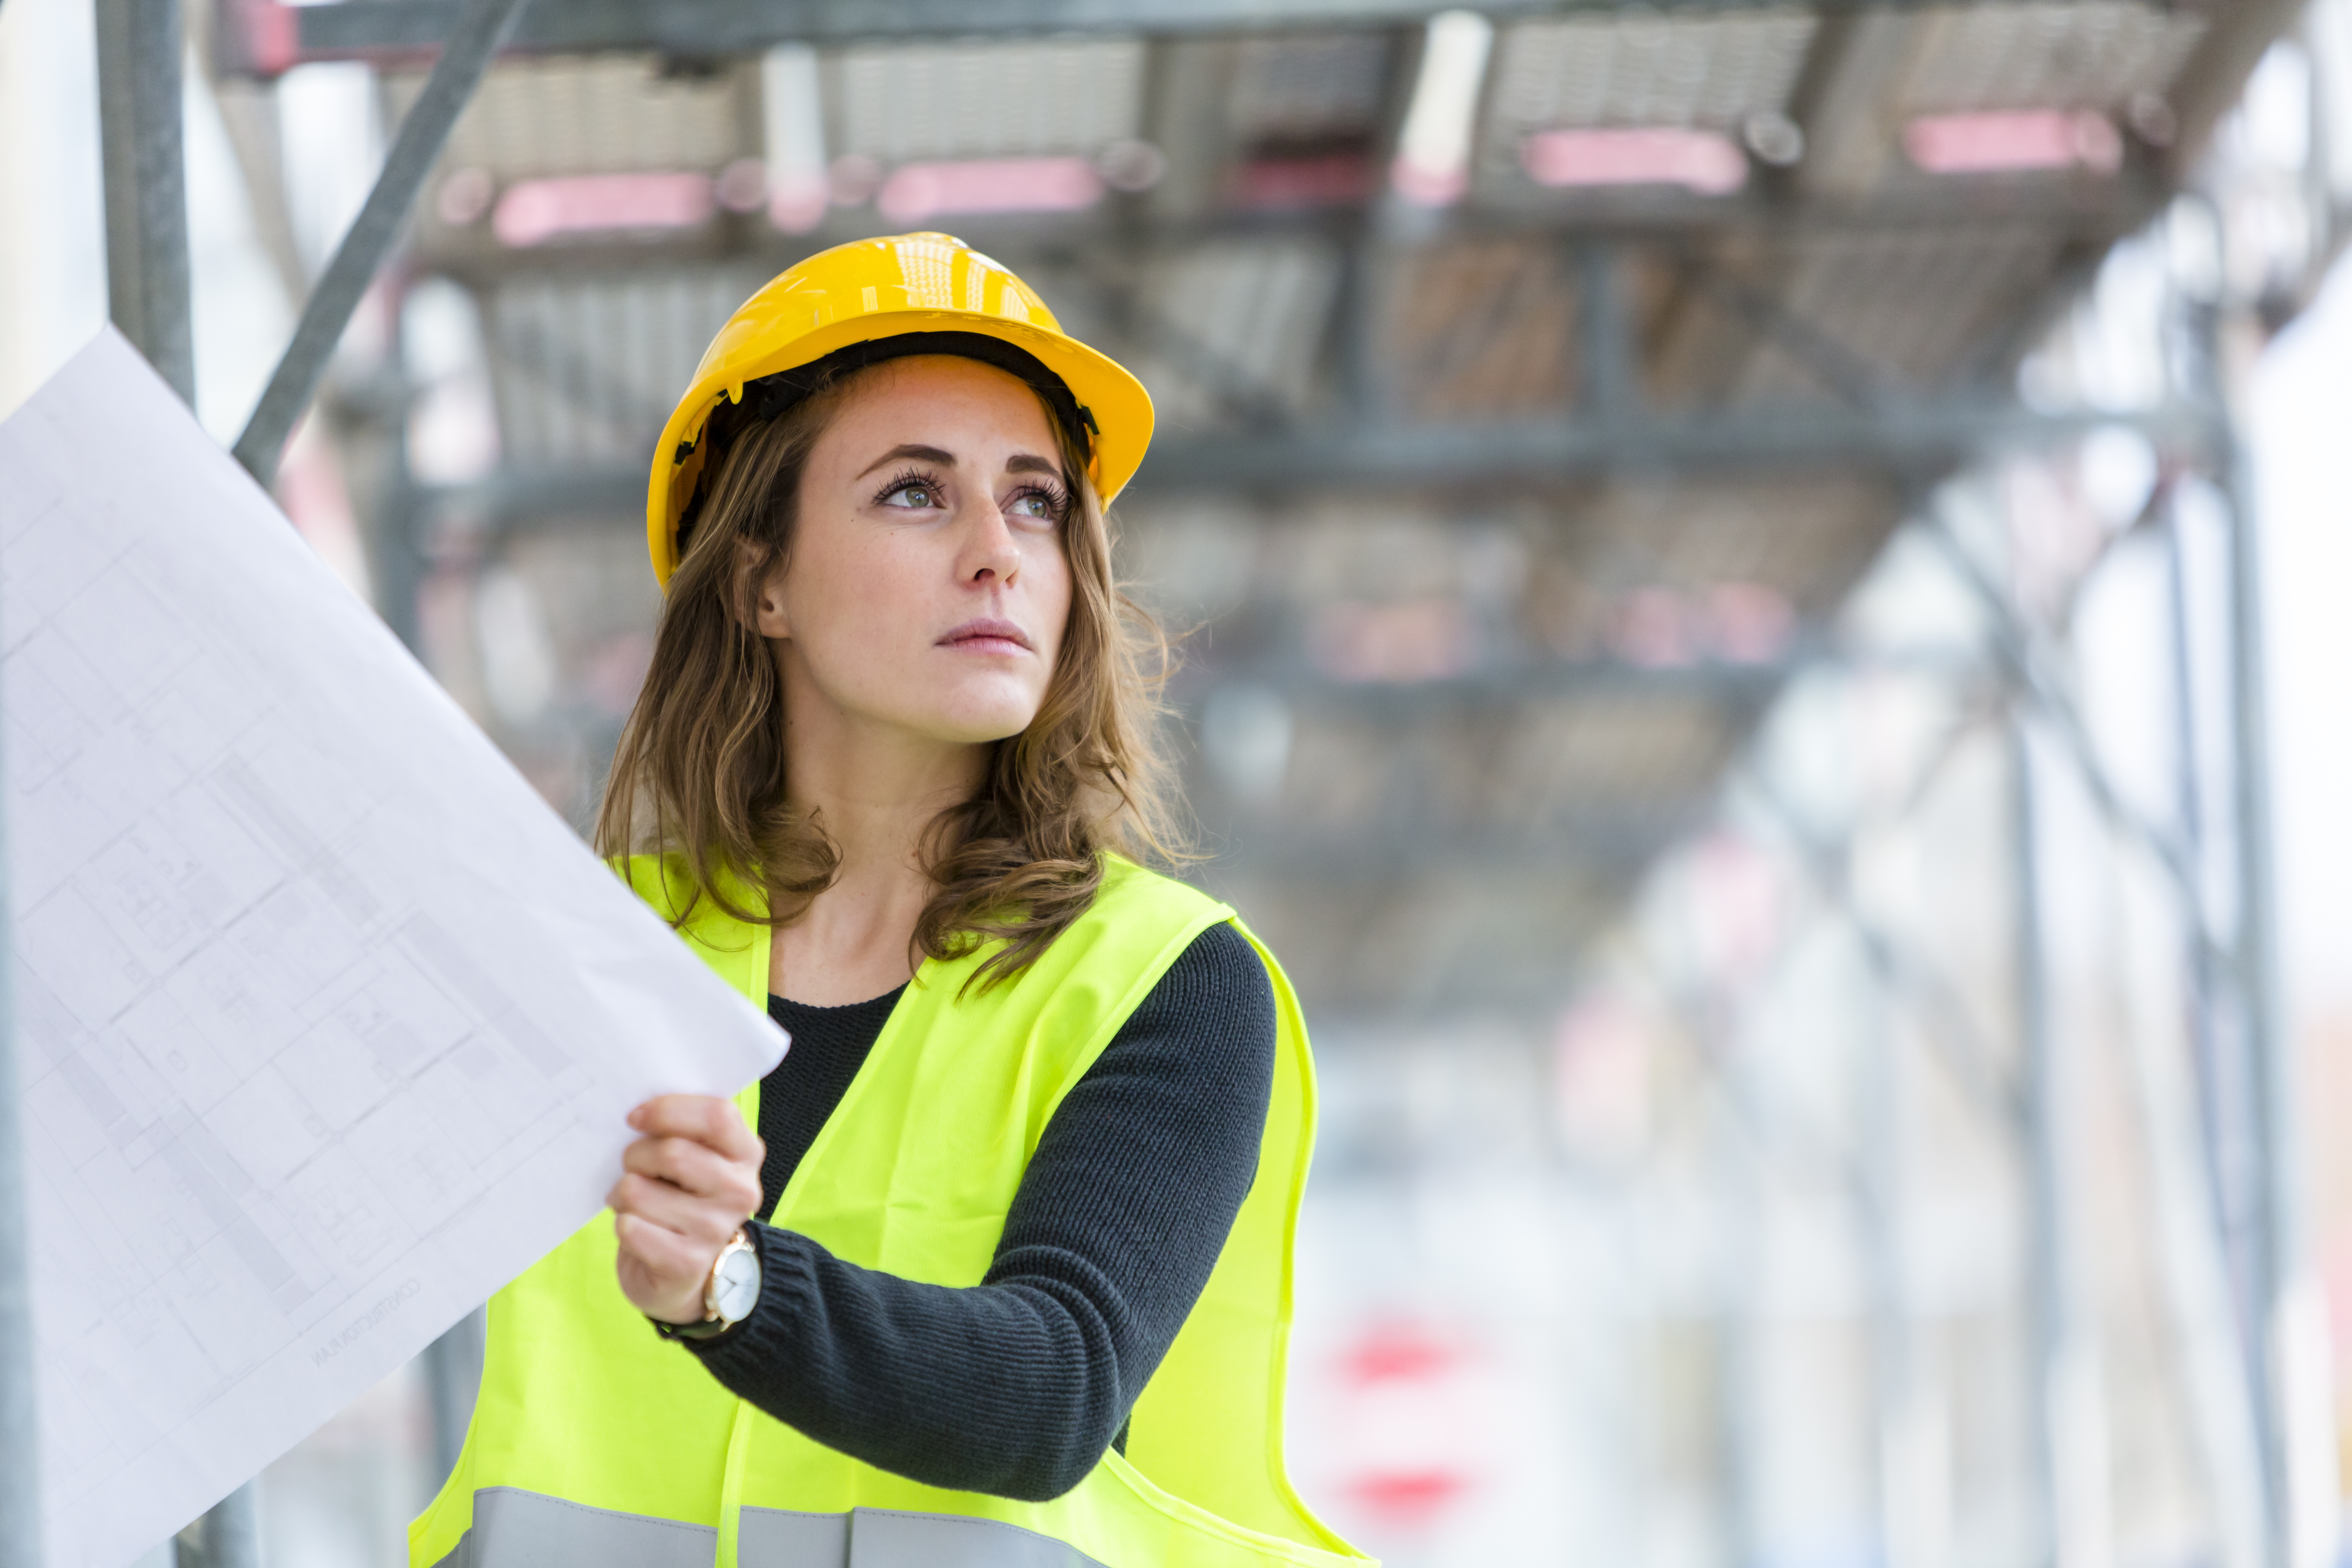 Construction and Trade Apprenticeships for Employers